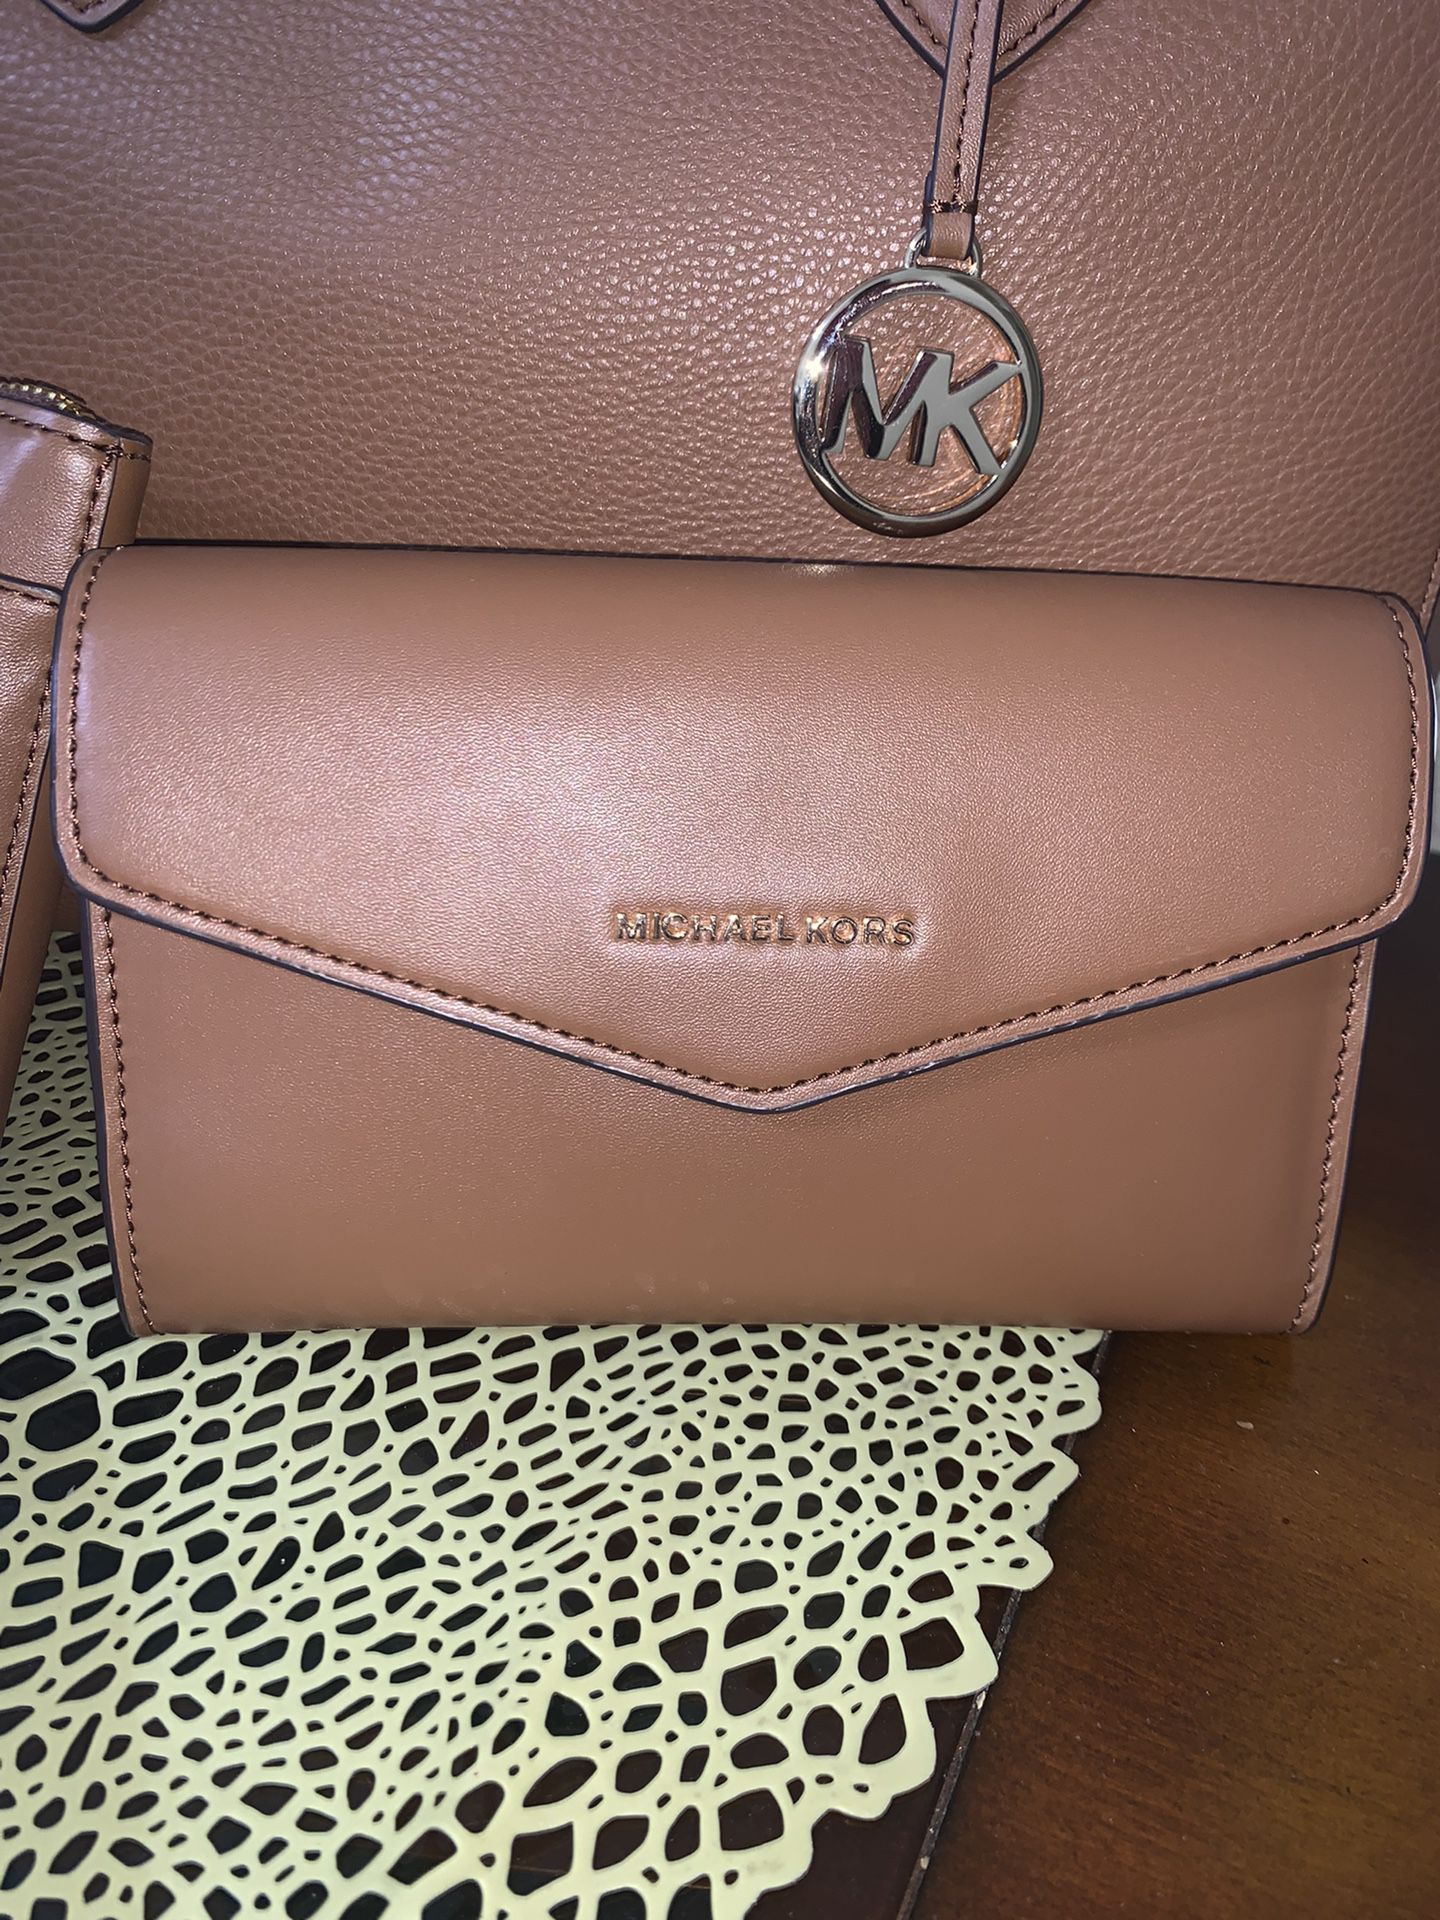 Michael Kors Kimberly 3in1 Tote Brown - $125 (77% Off Retail) New With Tags  - From Analyse